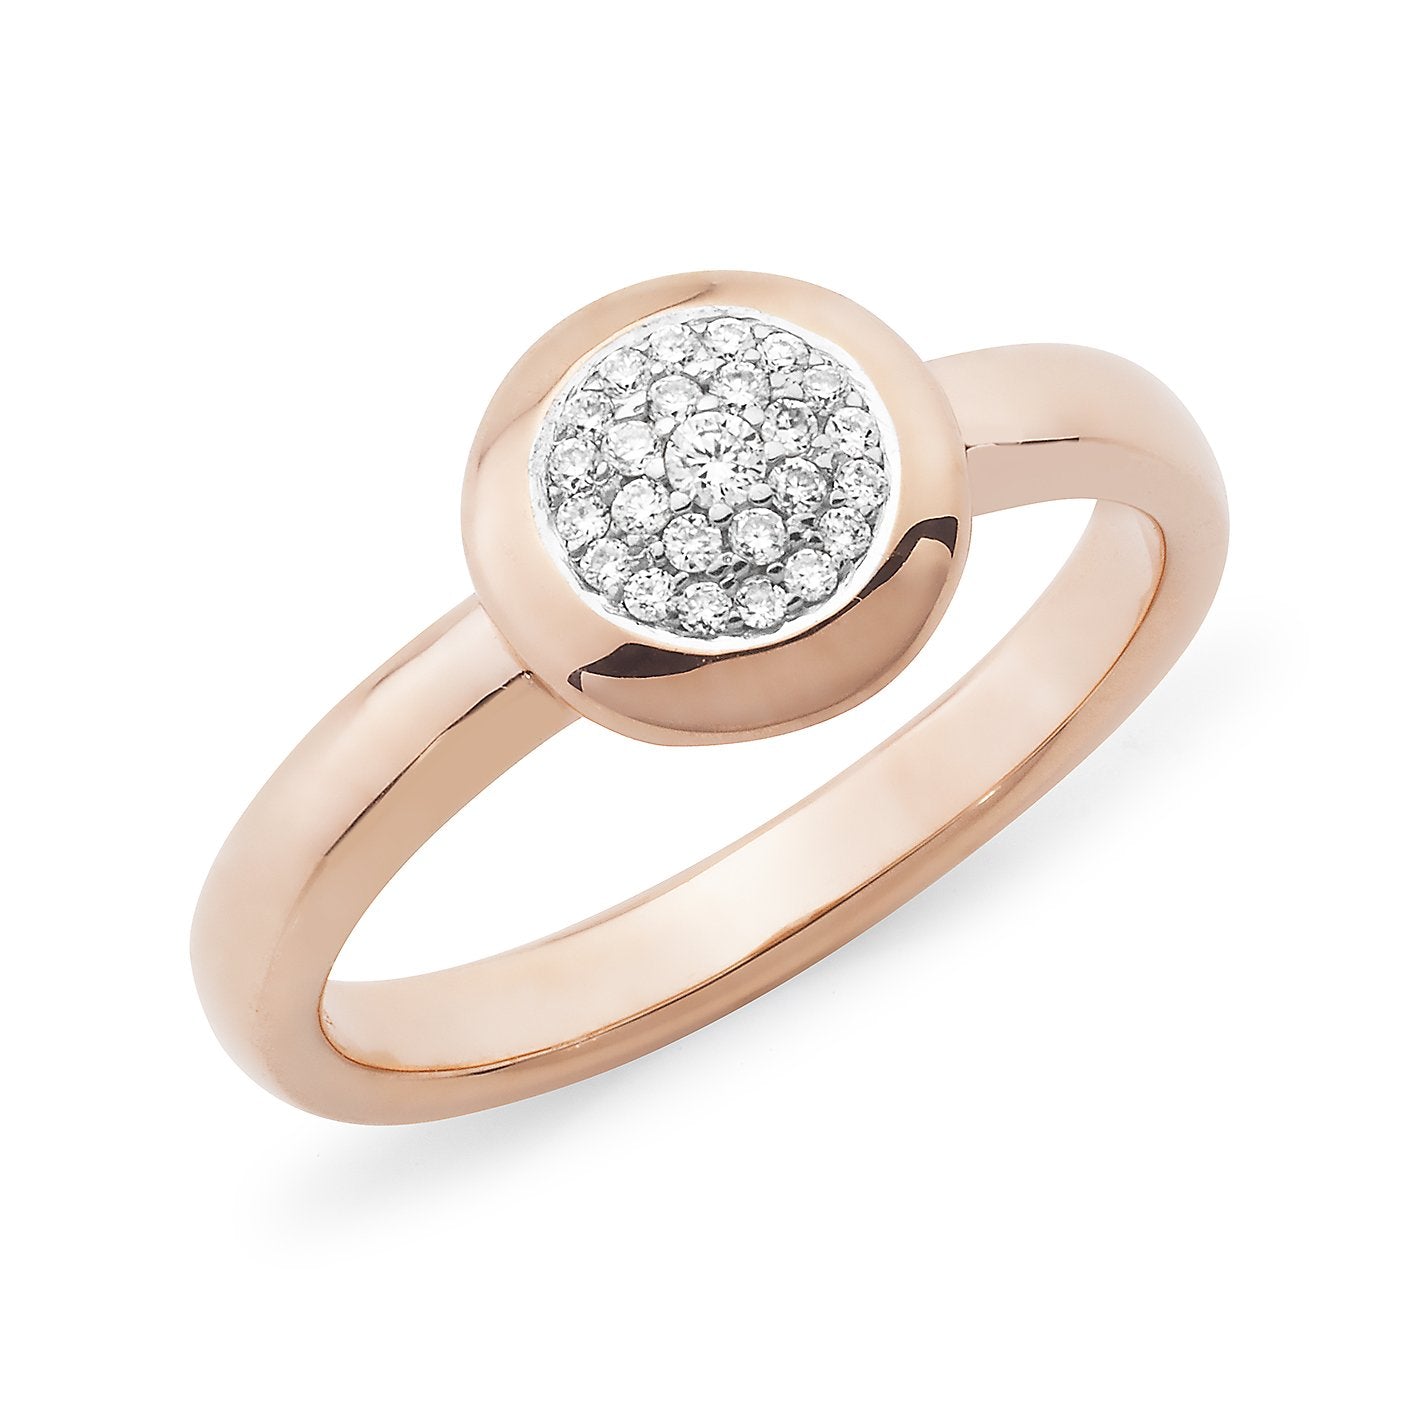 0.14ct Diamond Pave Dress Ring in 9ct Rose Gold